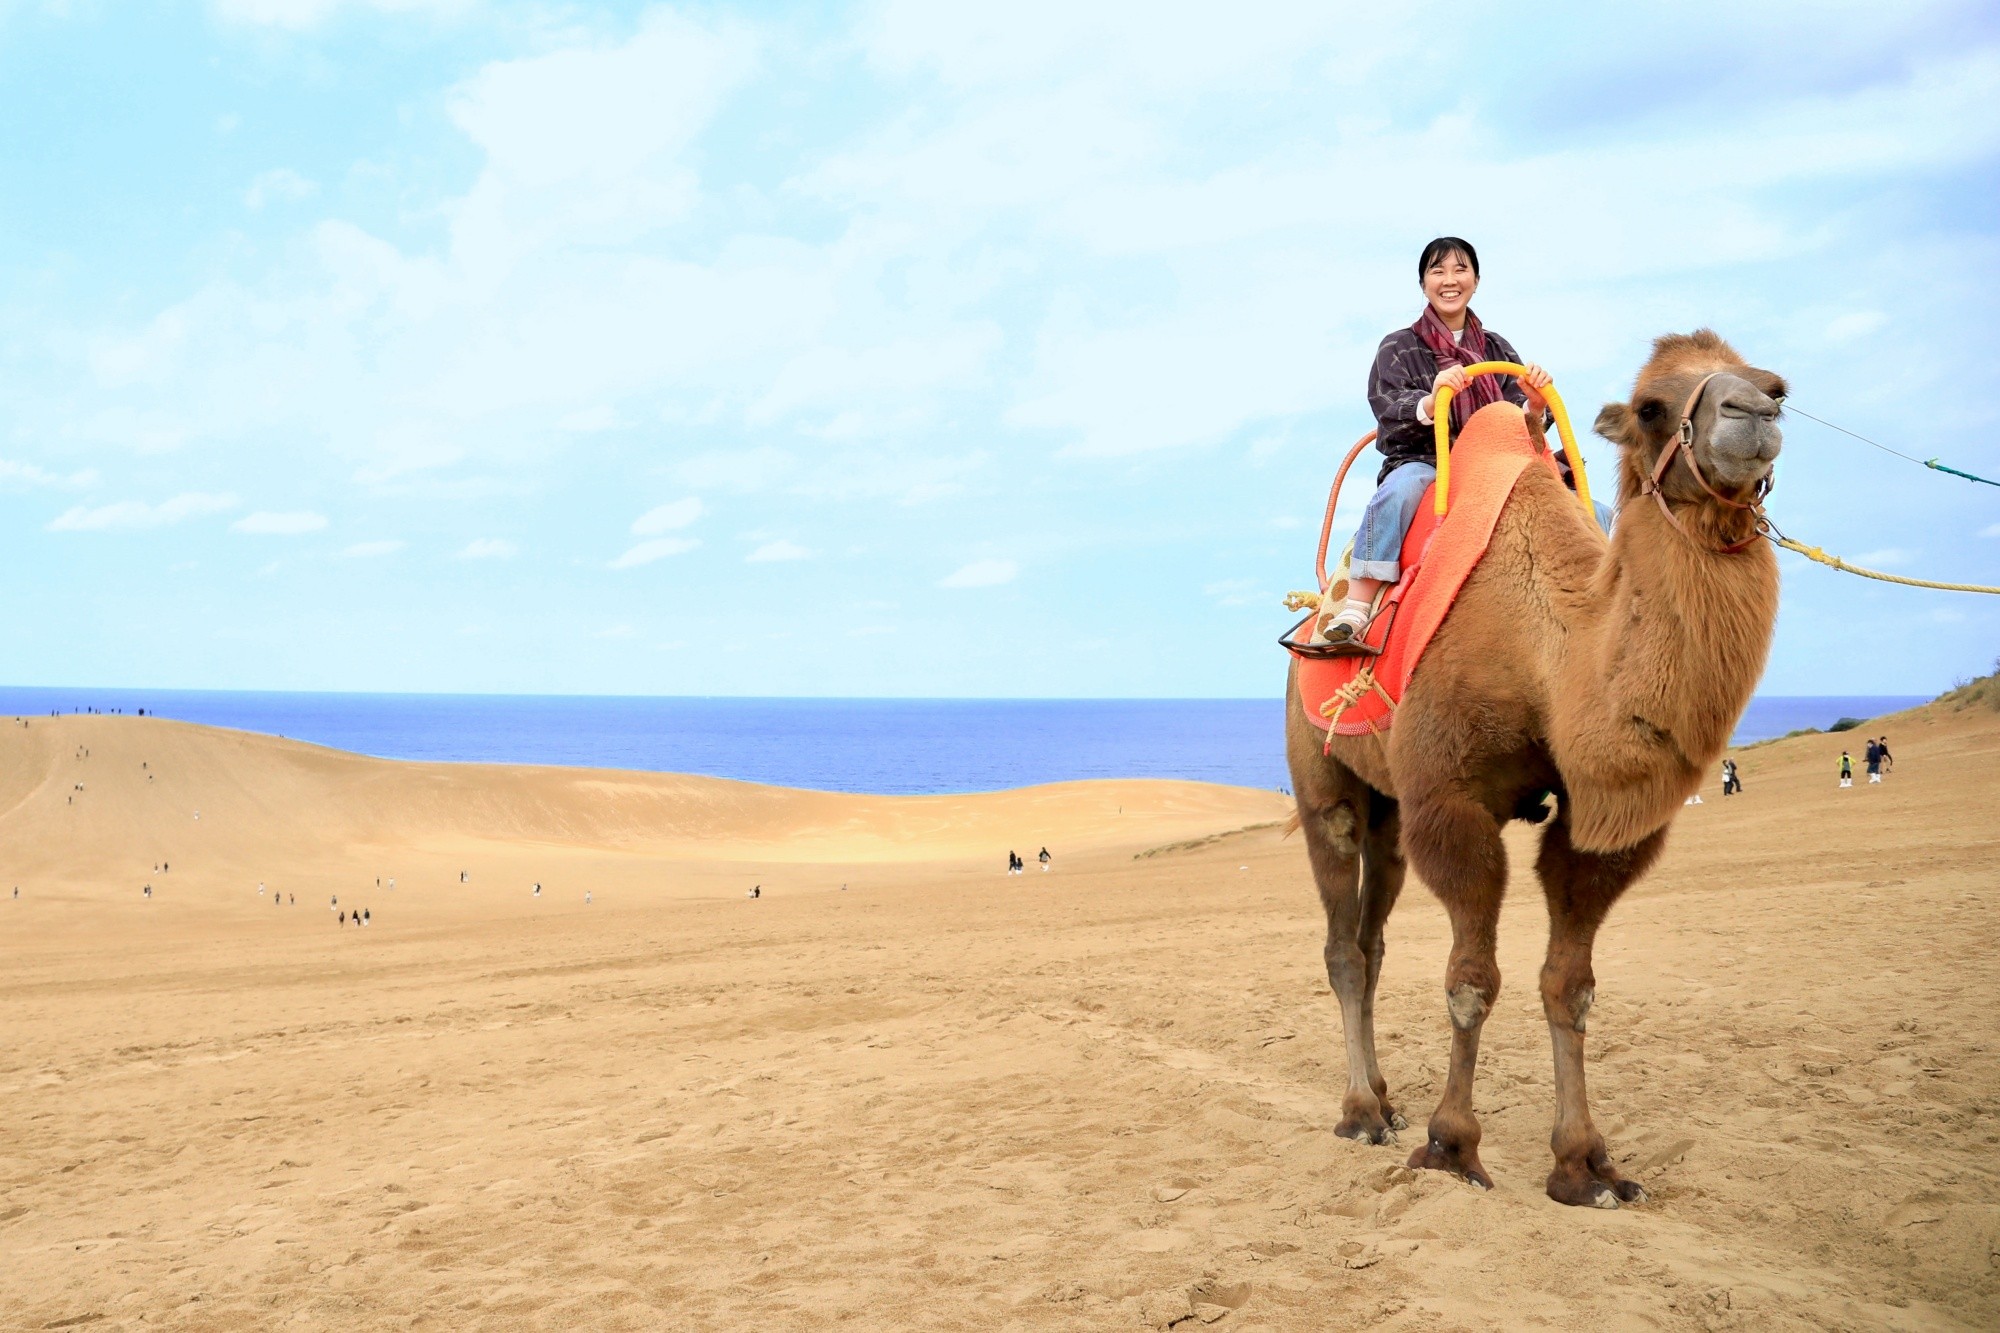 Camel ride experience